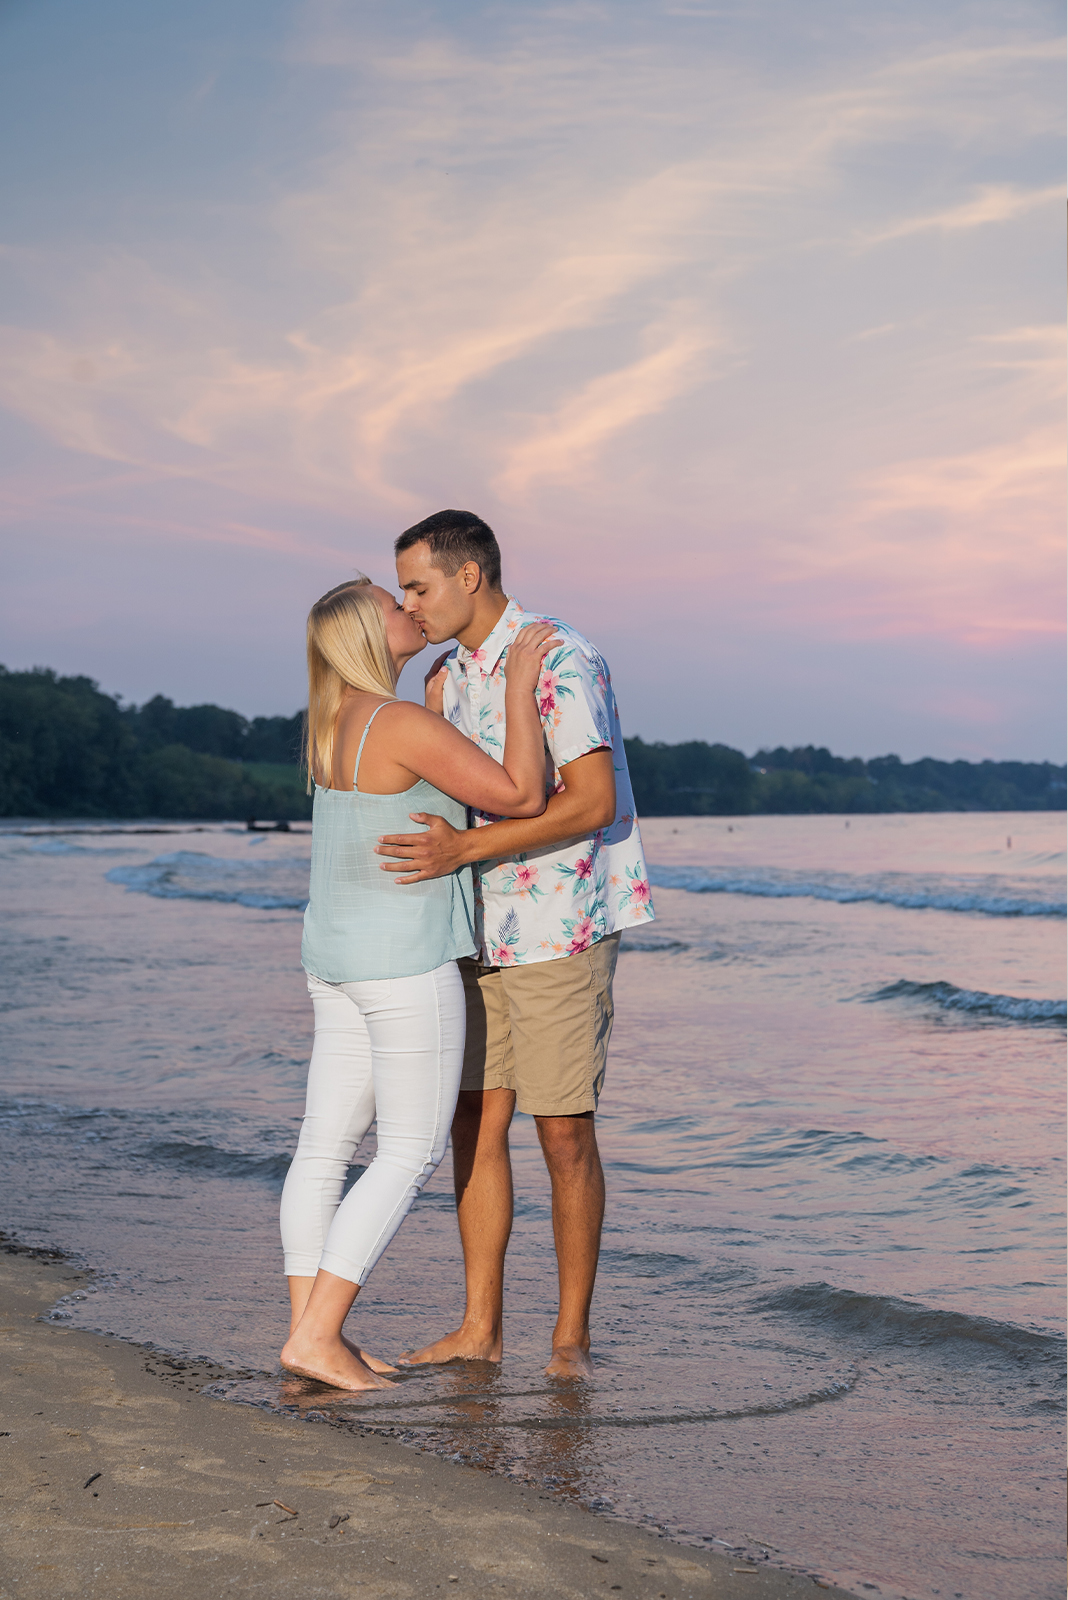 Man and woman fiancee engagement photo, couple portrait, kiss, beach, water, nature, trees, Lake Erie, sunset, Edgewater Beach, Cleveland Metroparks